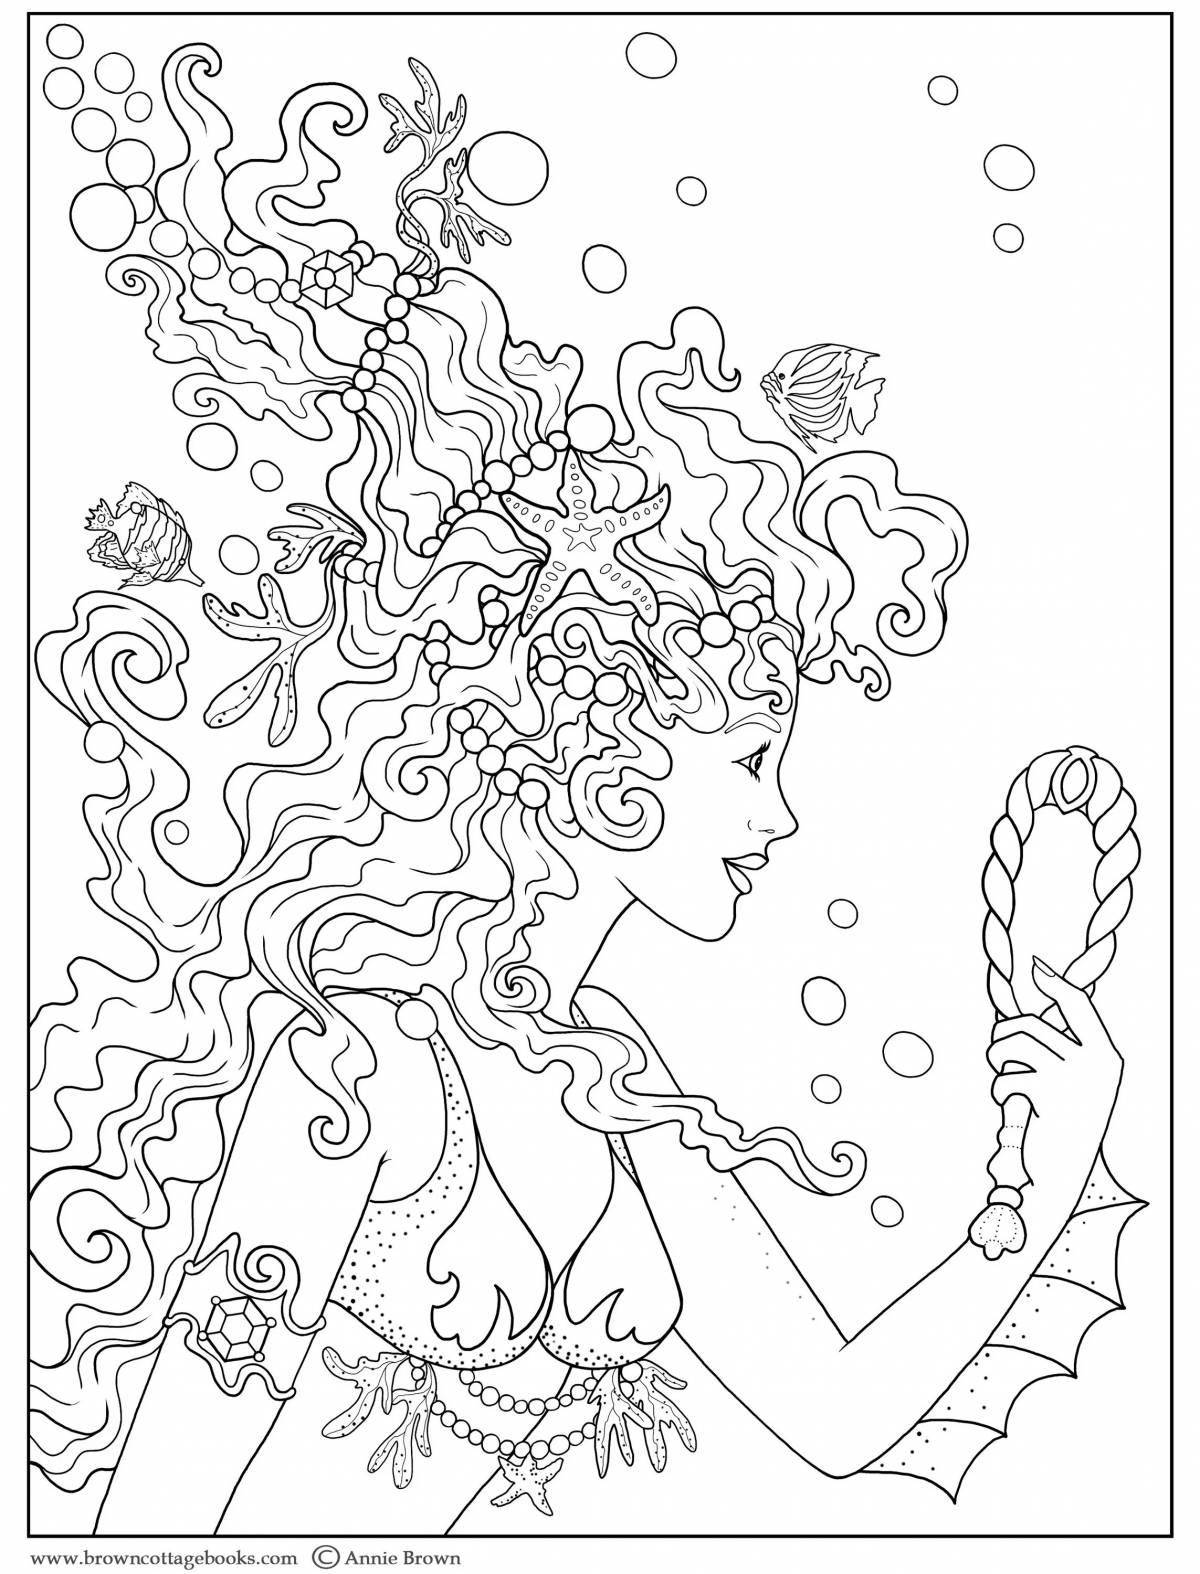 Coloring page shiny siren head